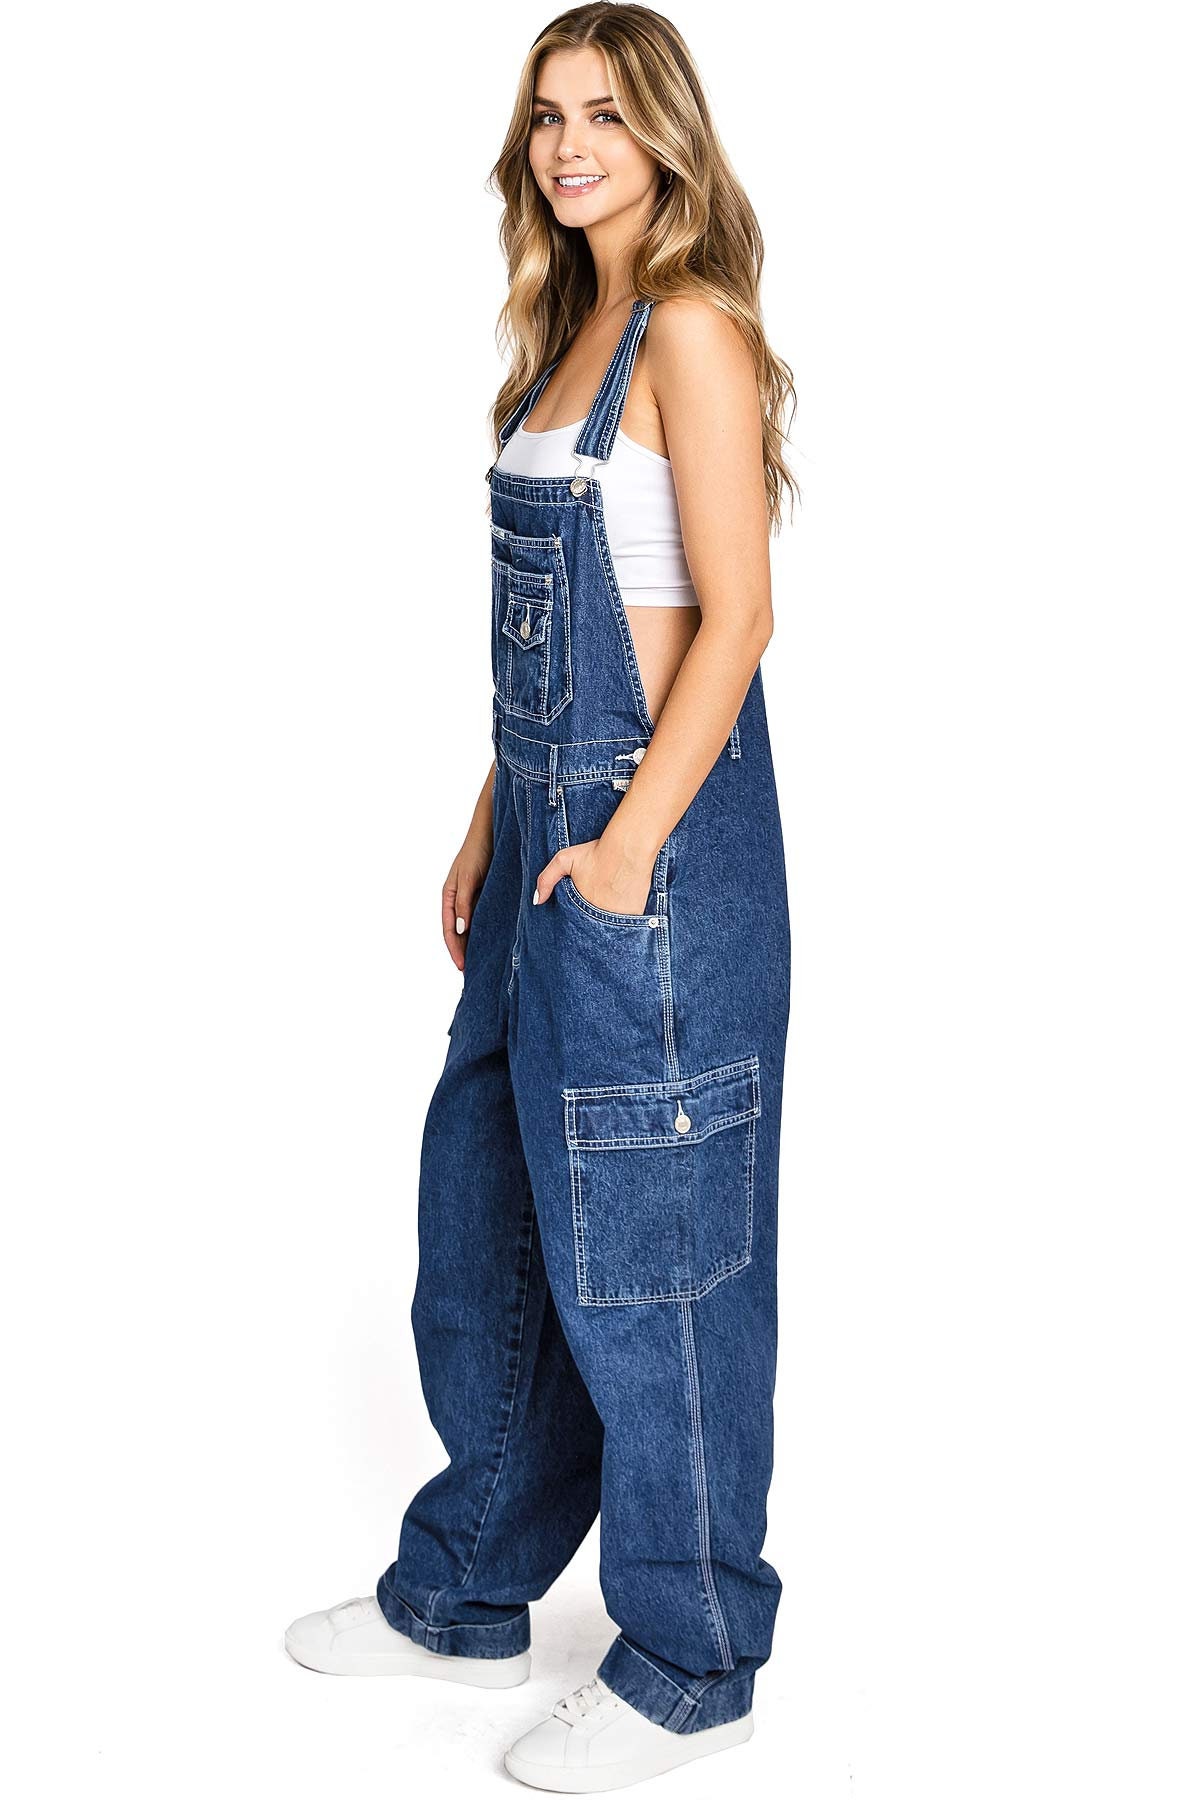 PLUS SIZE Revolt 90s Denim Vintage Overalls With Cargo Style - Etsy Canada